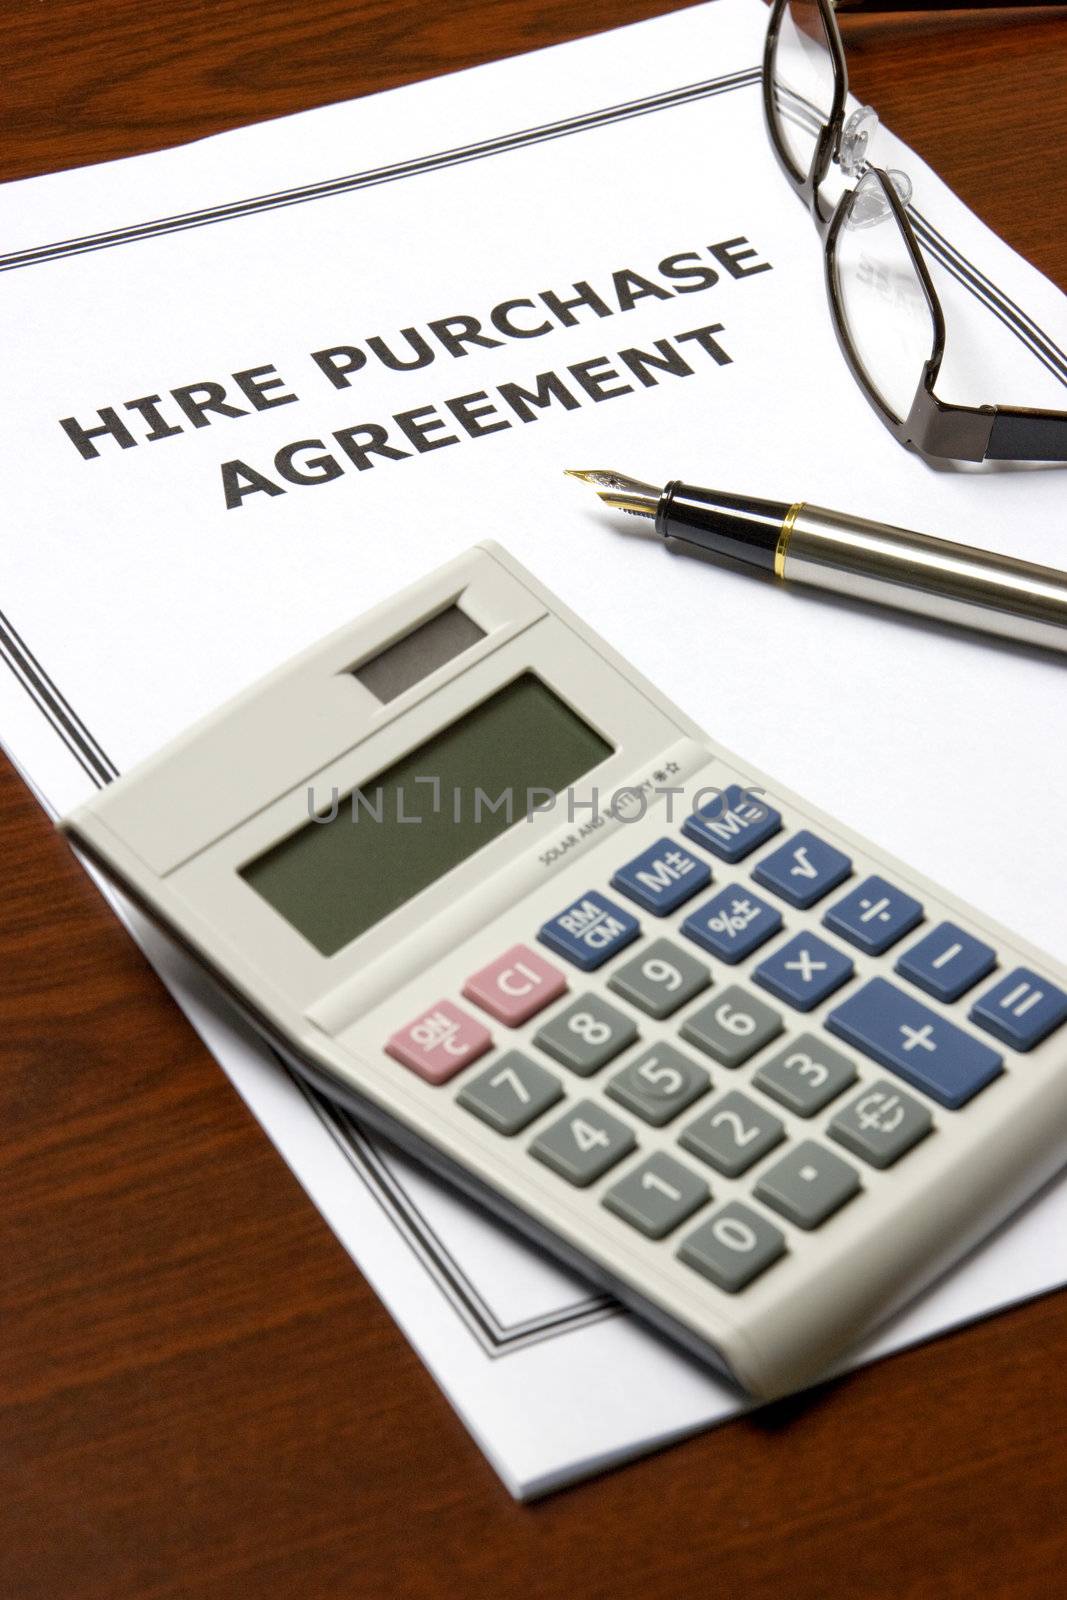 Hire Purchase Agreement by shariffc